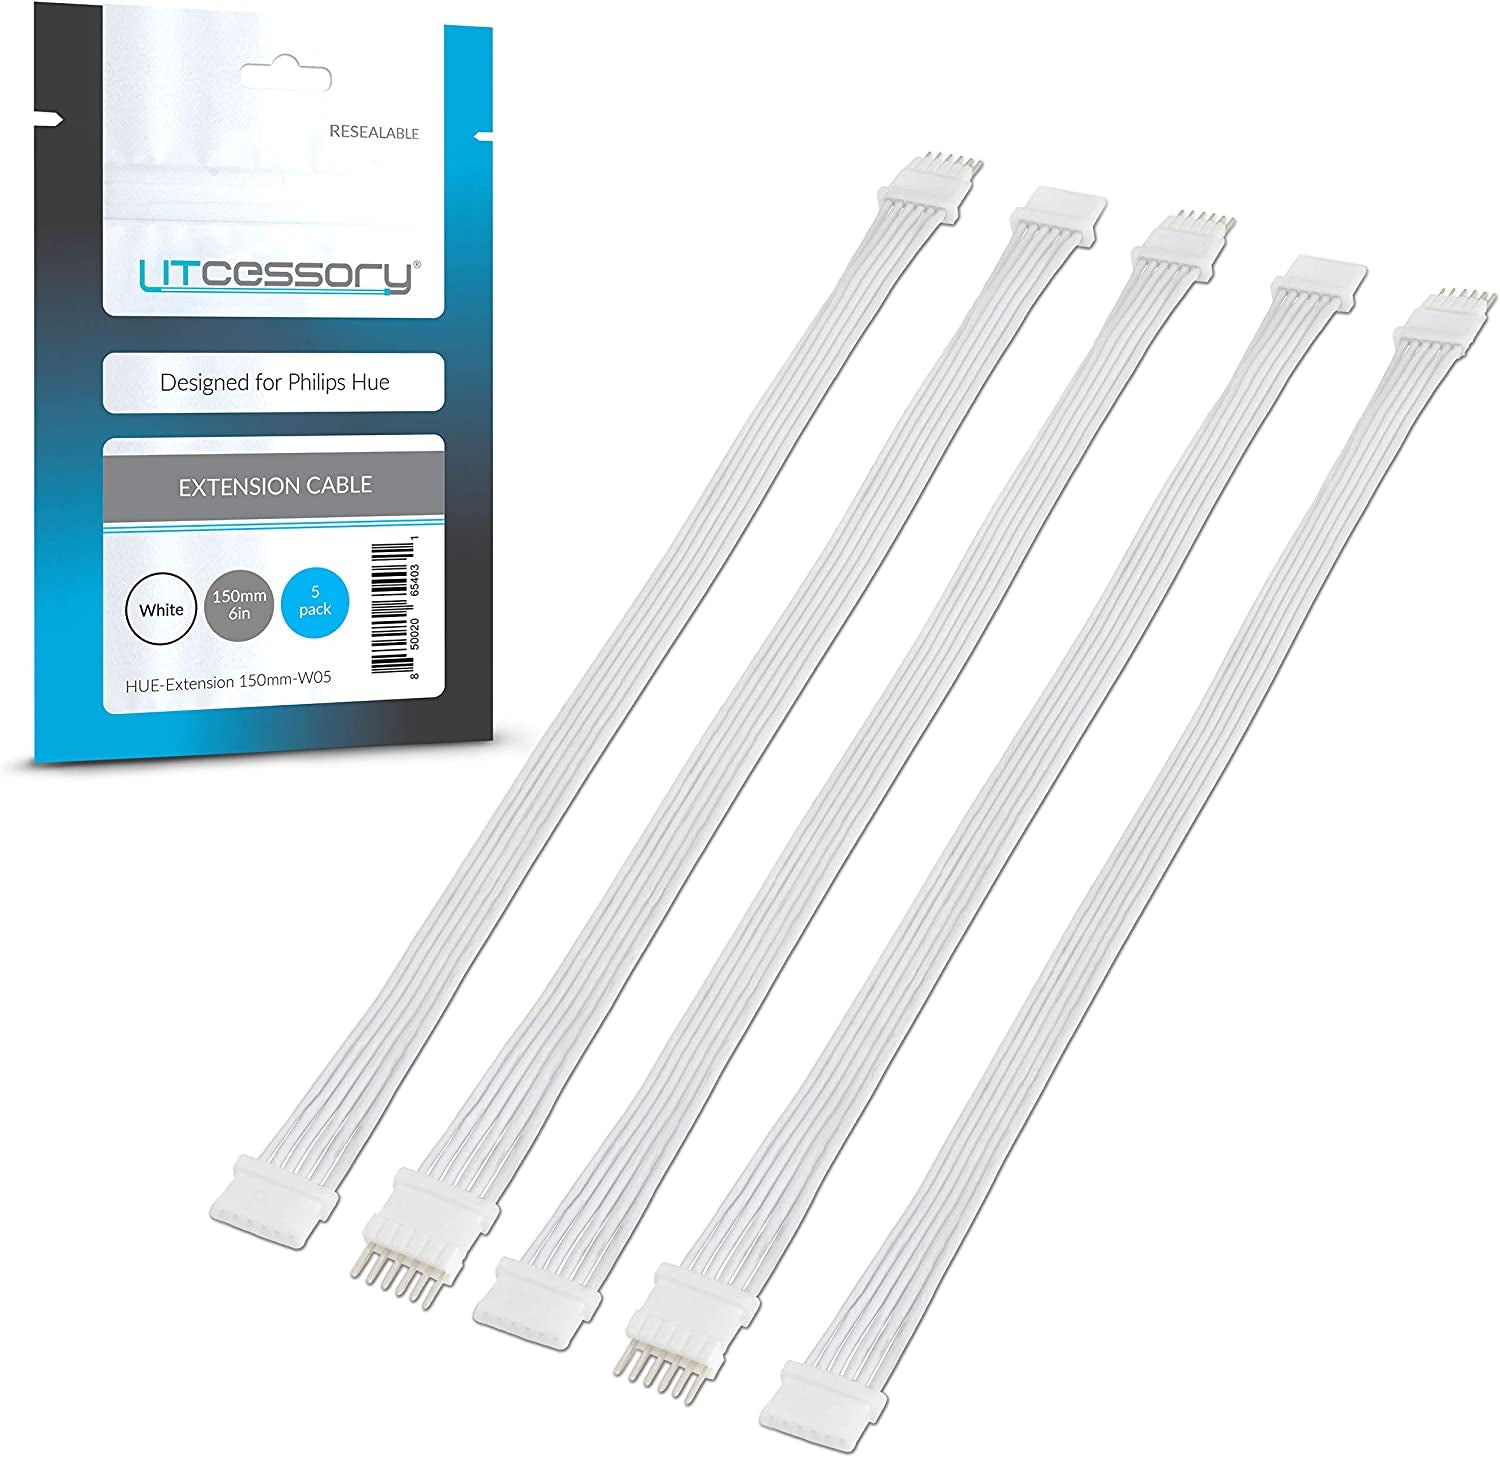 Litcessory, Litcessory Extension Cable for Philips Hue Lightstrip plus (150Mm, 5 Pack, White - Micro 6-PIN V4)